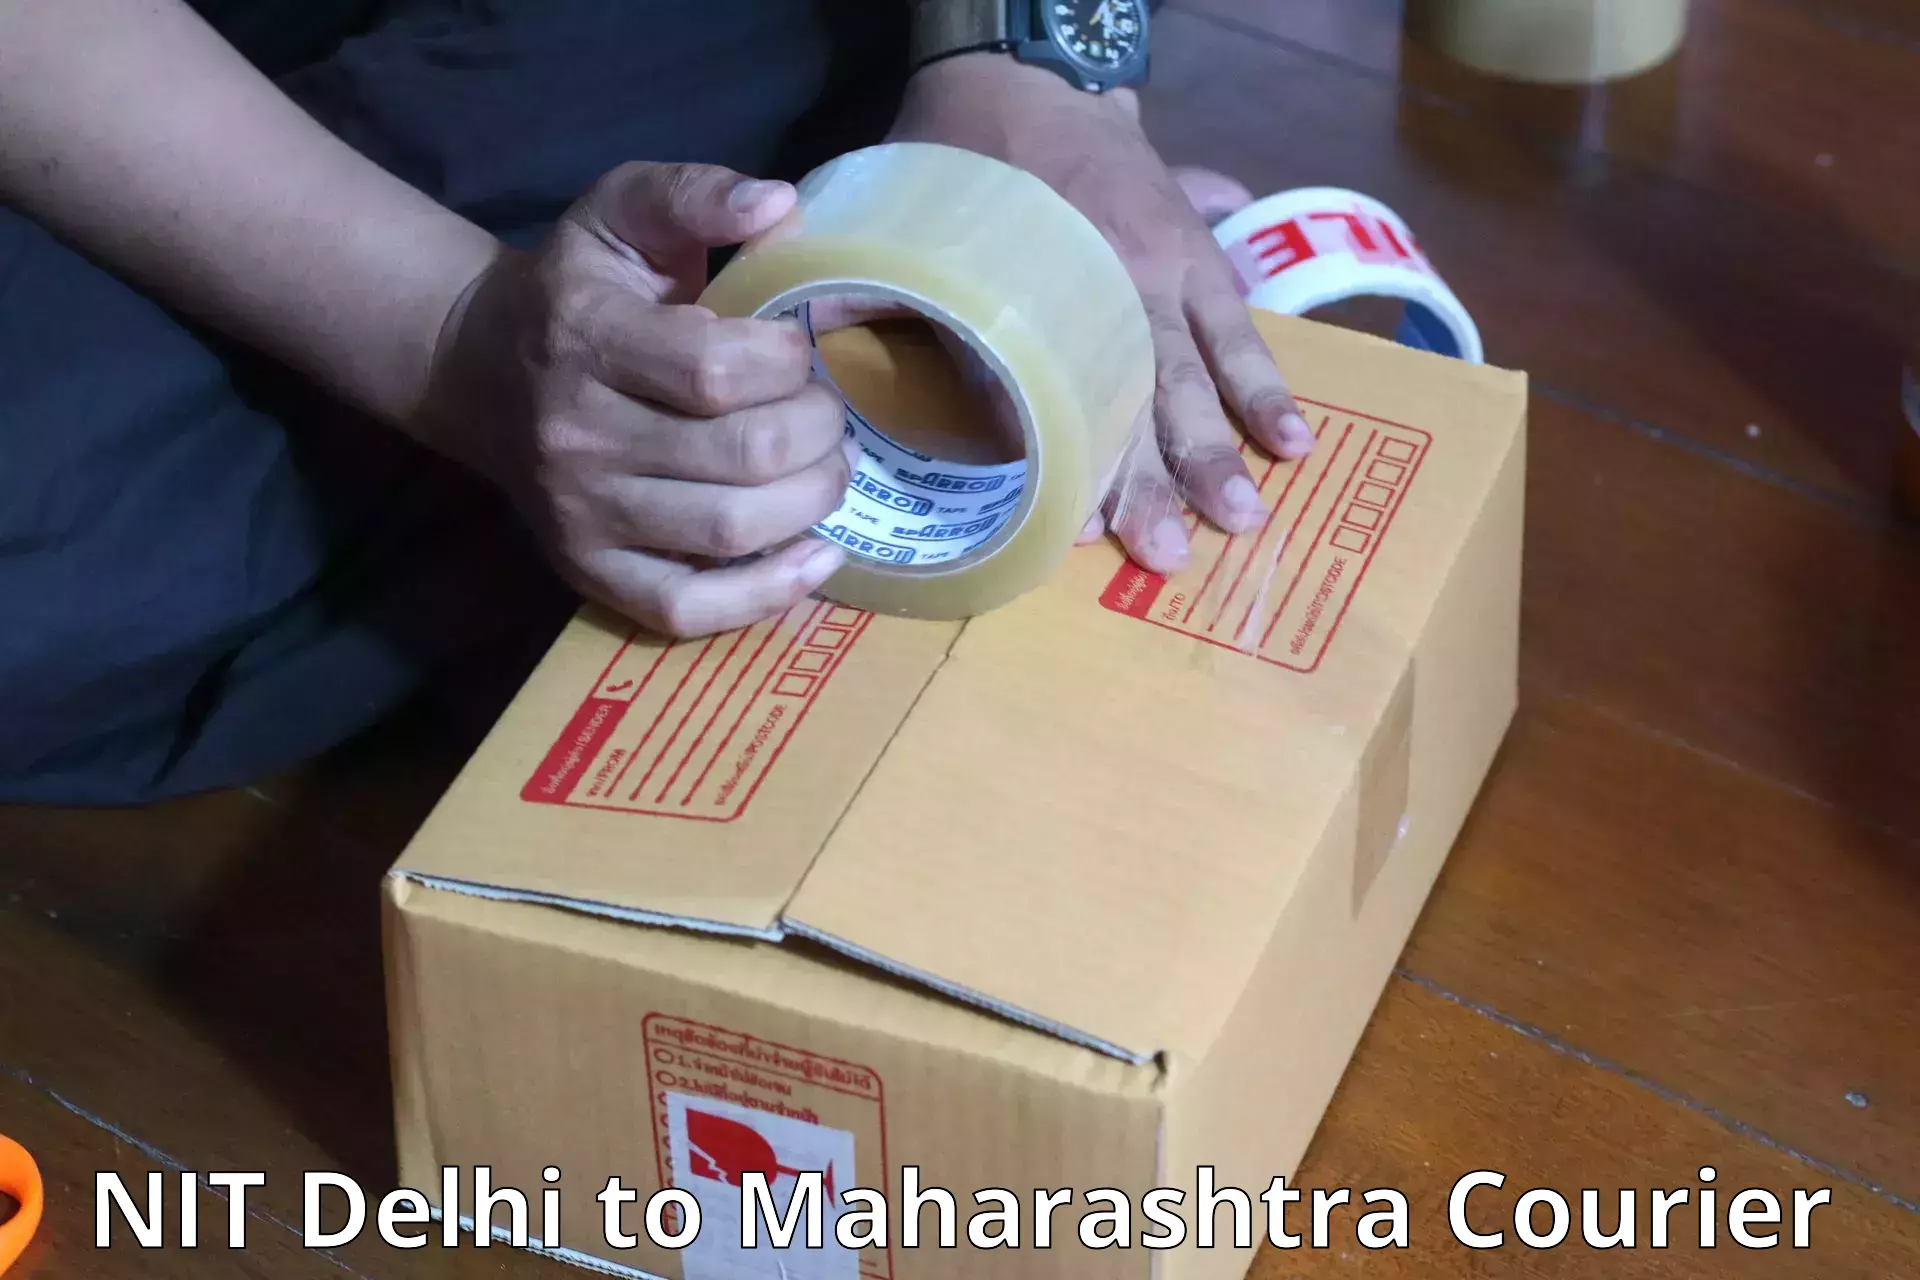 Personal effects shipping in NIT Delhi to Morshi